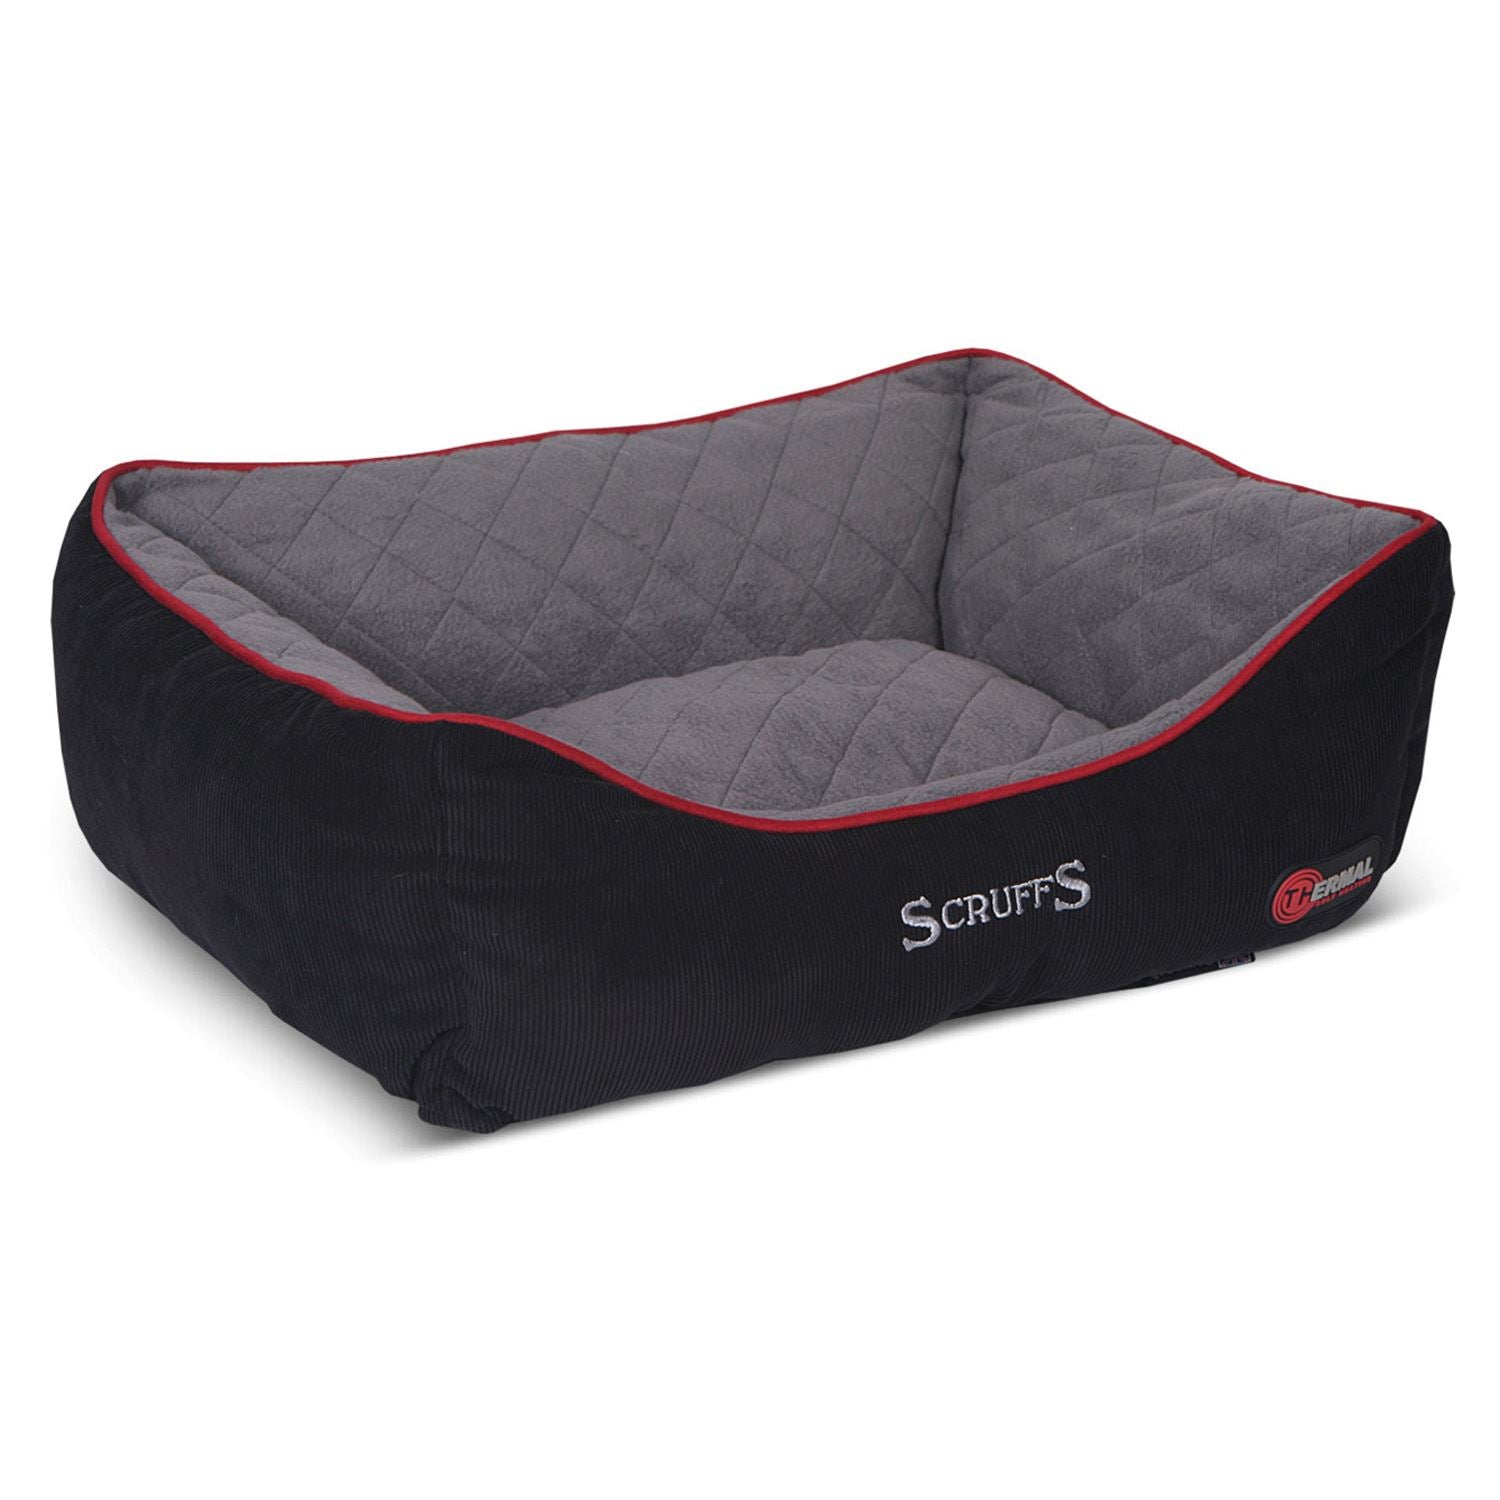 Scruffs Thermal Box Bed - Just Horse Riders